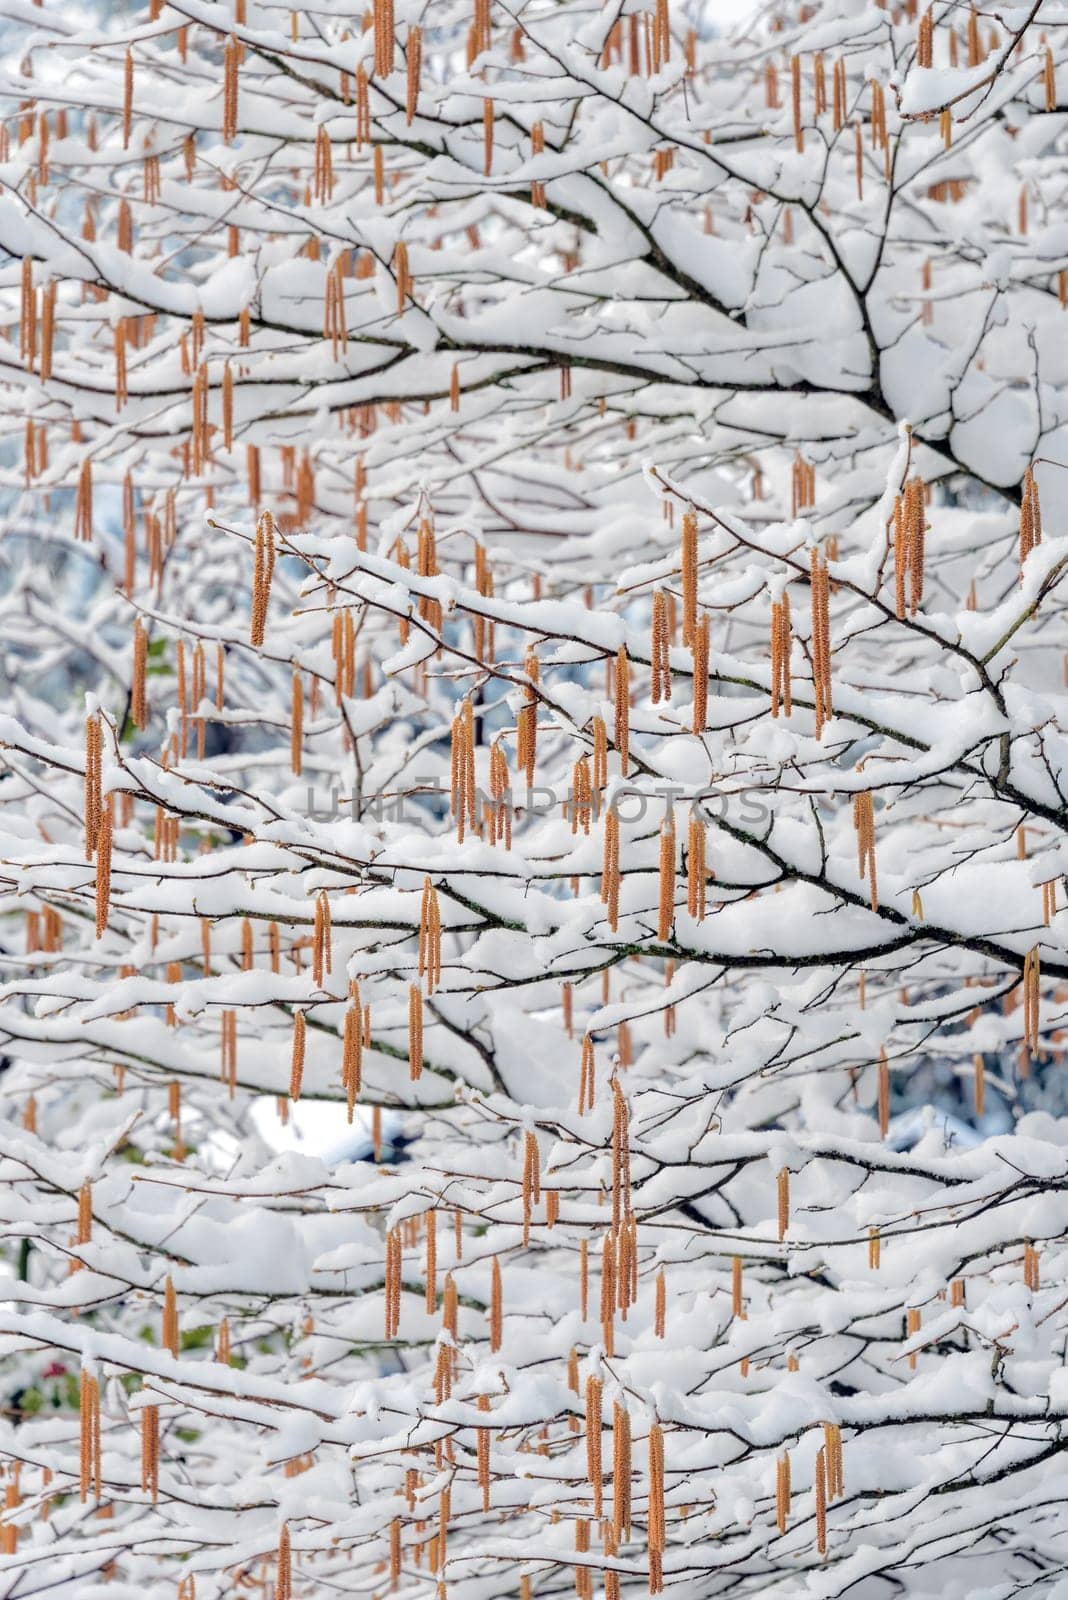 Tree branches with seeds covered in snow.